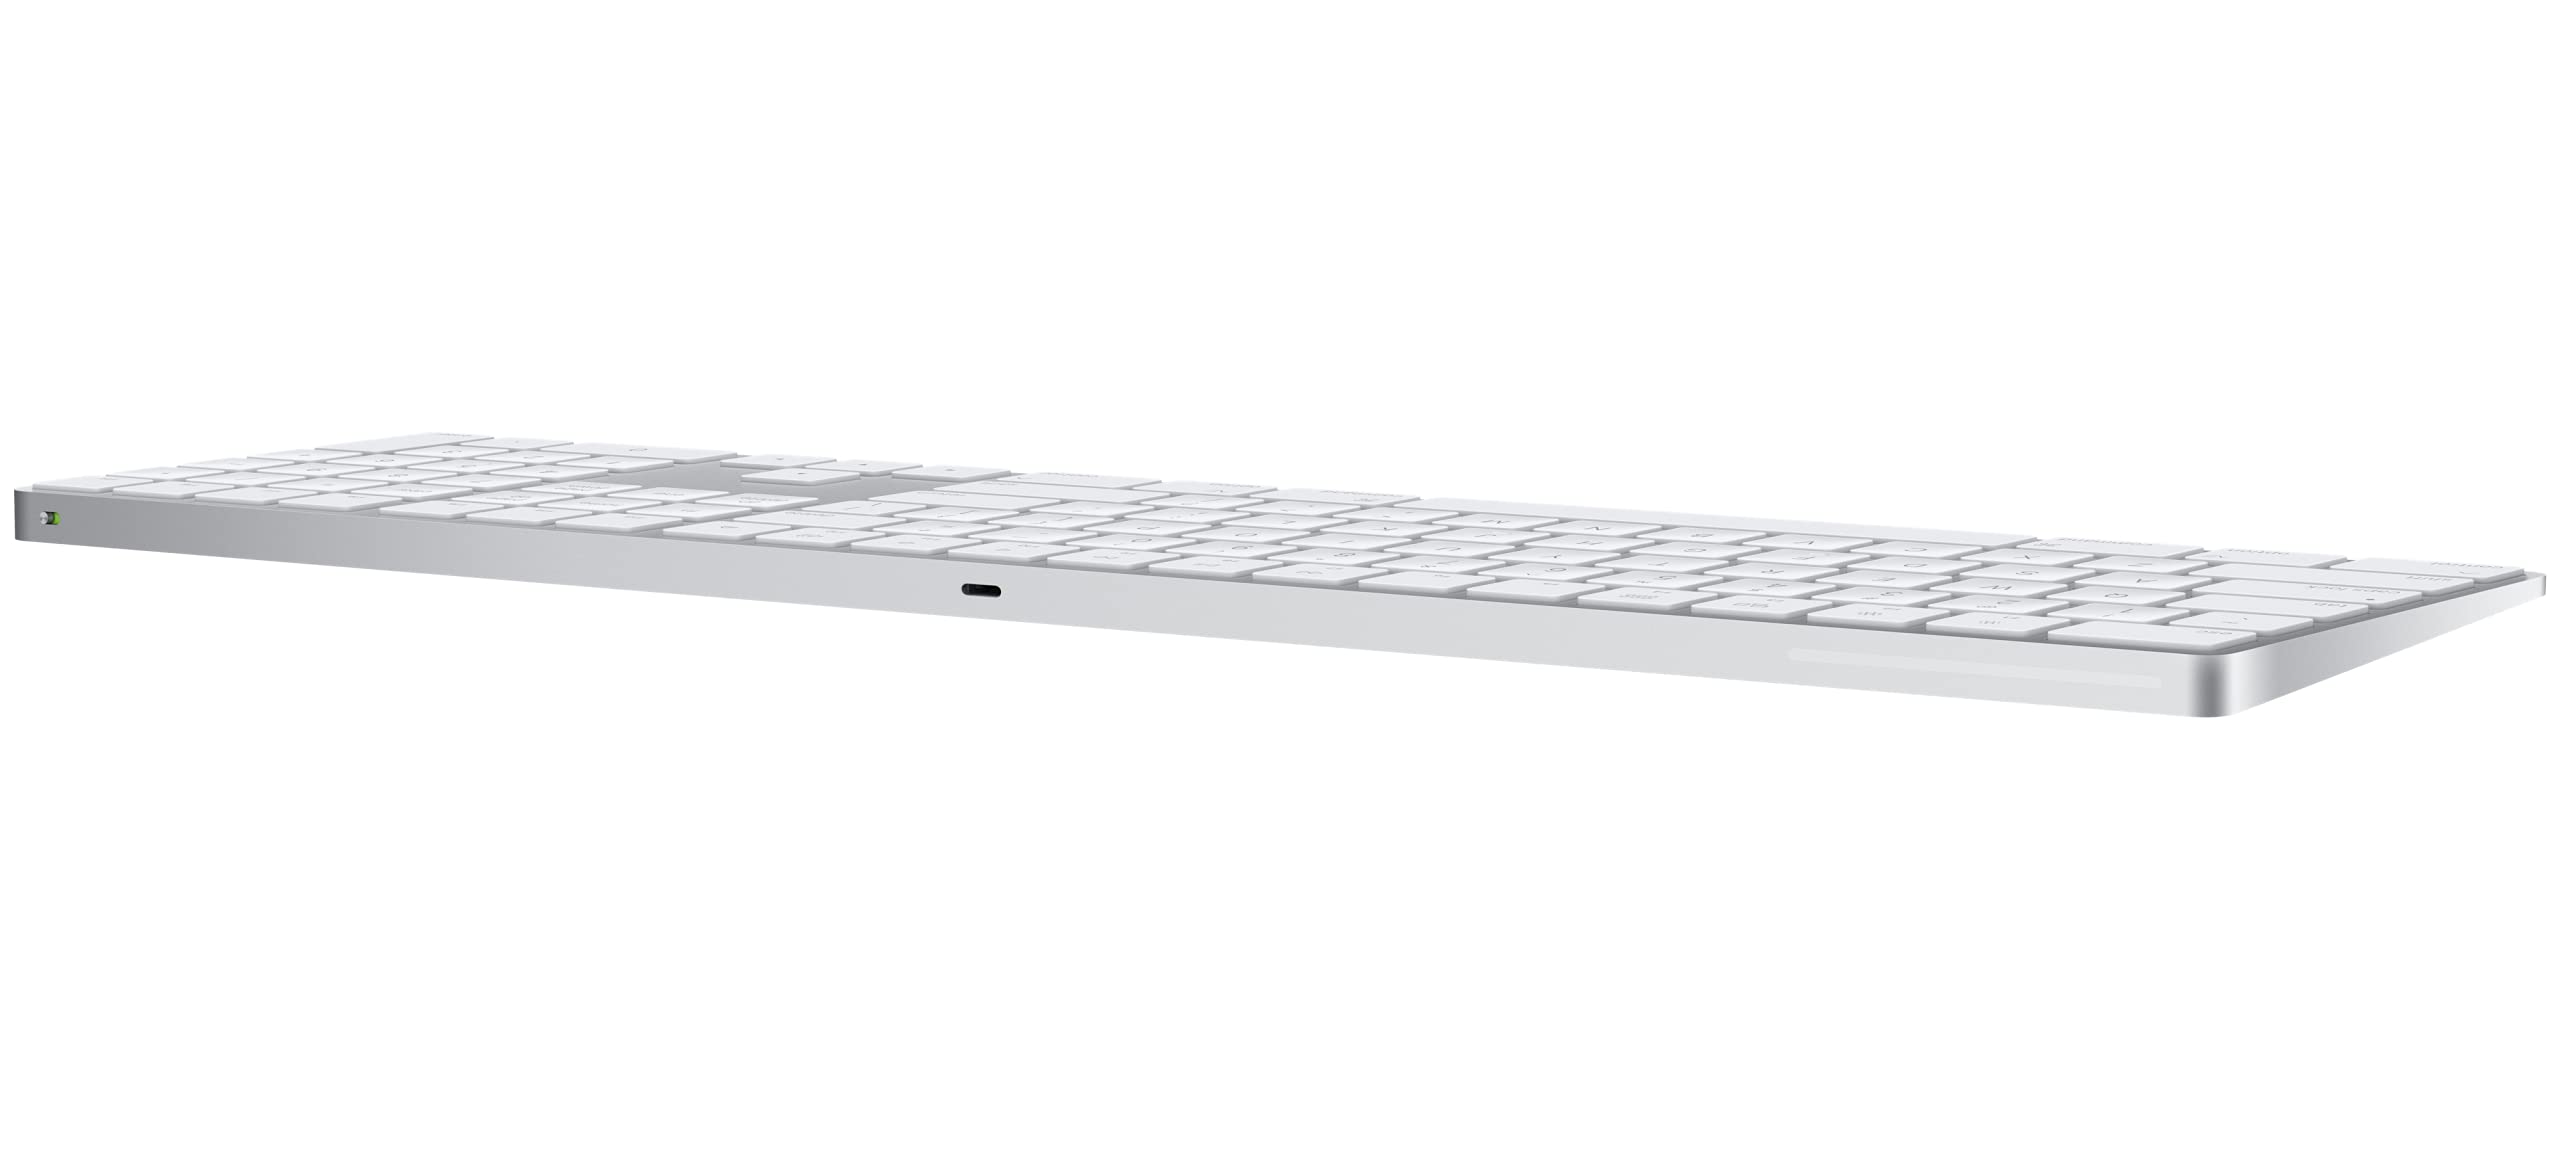 Apple Magic Keyboard with Numeric Keypad: Wireless, Bluetooth, Rechargeable. Works with Mac, iPad, or iPhone; US English - White